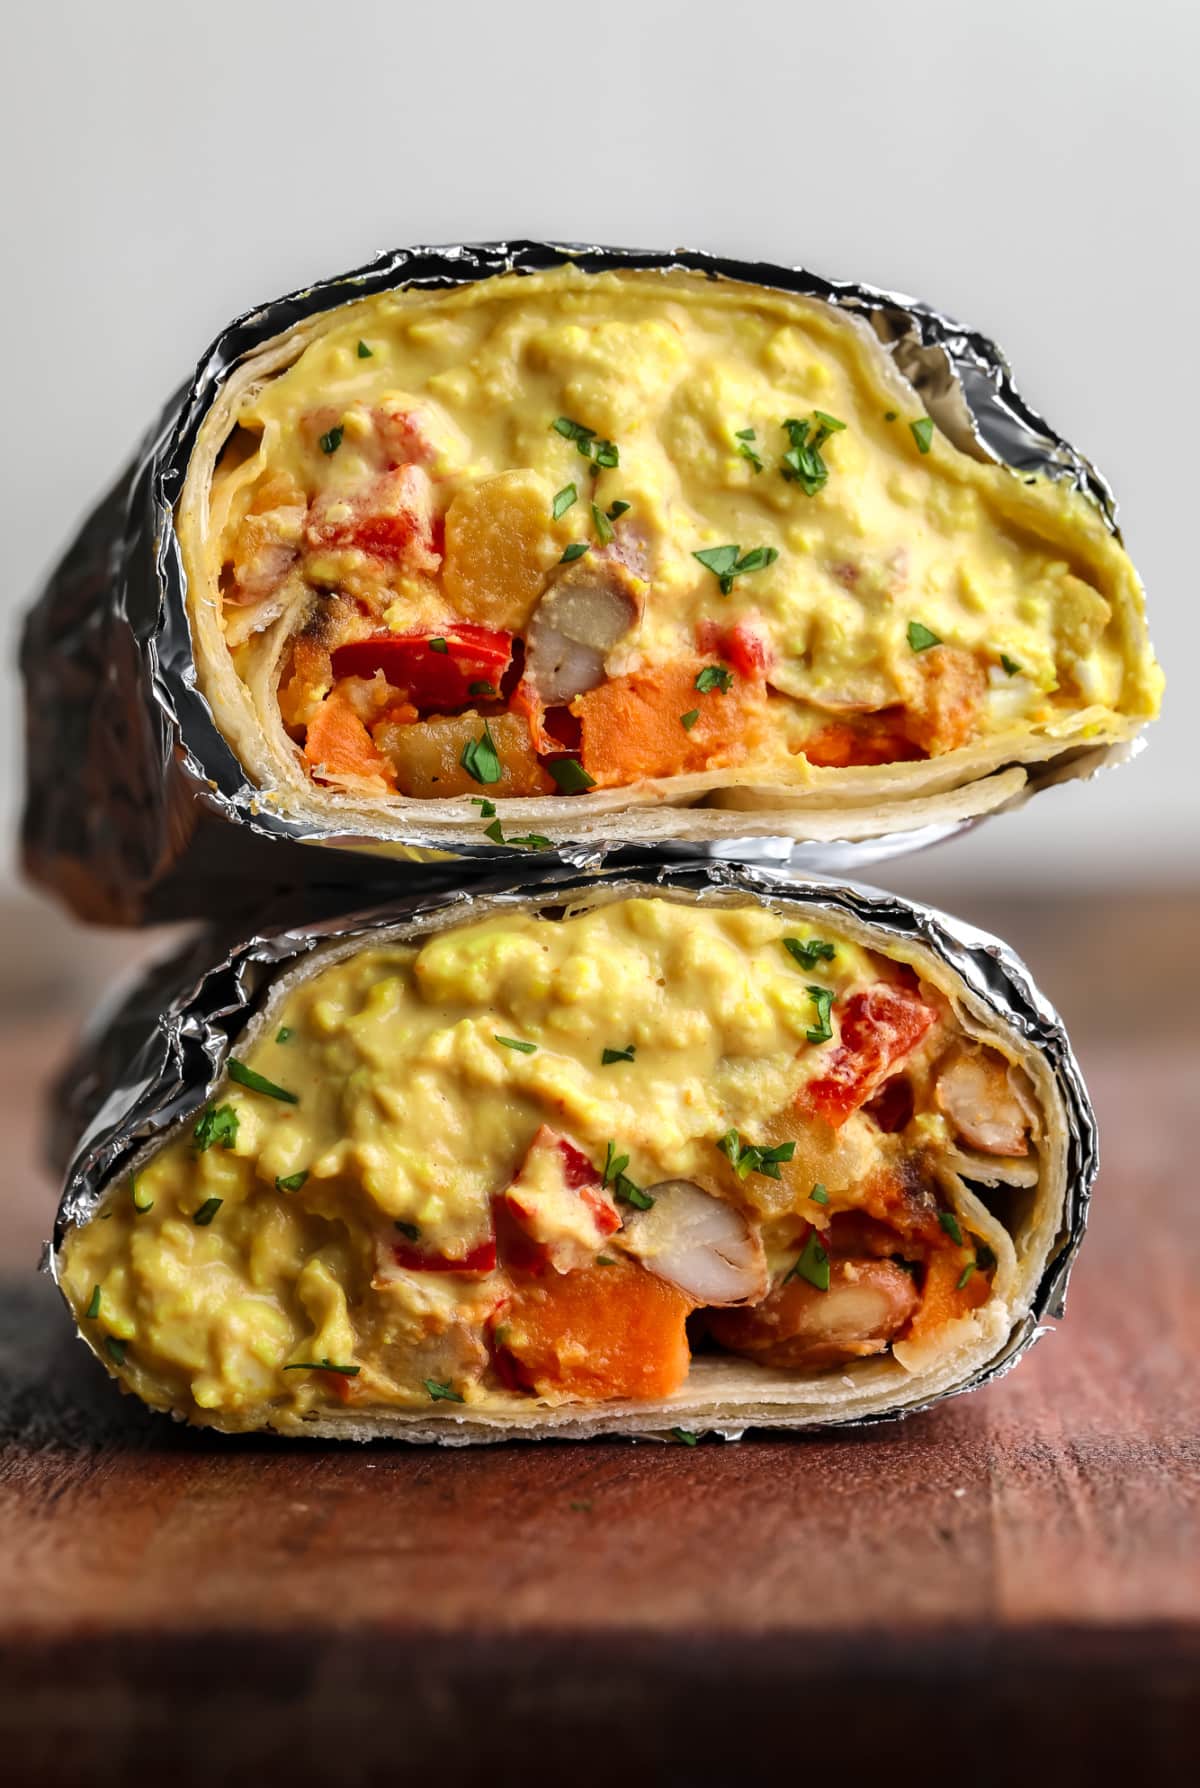 burrito cut in half with foil around it on wood board with eggy mixture plus veggies